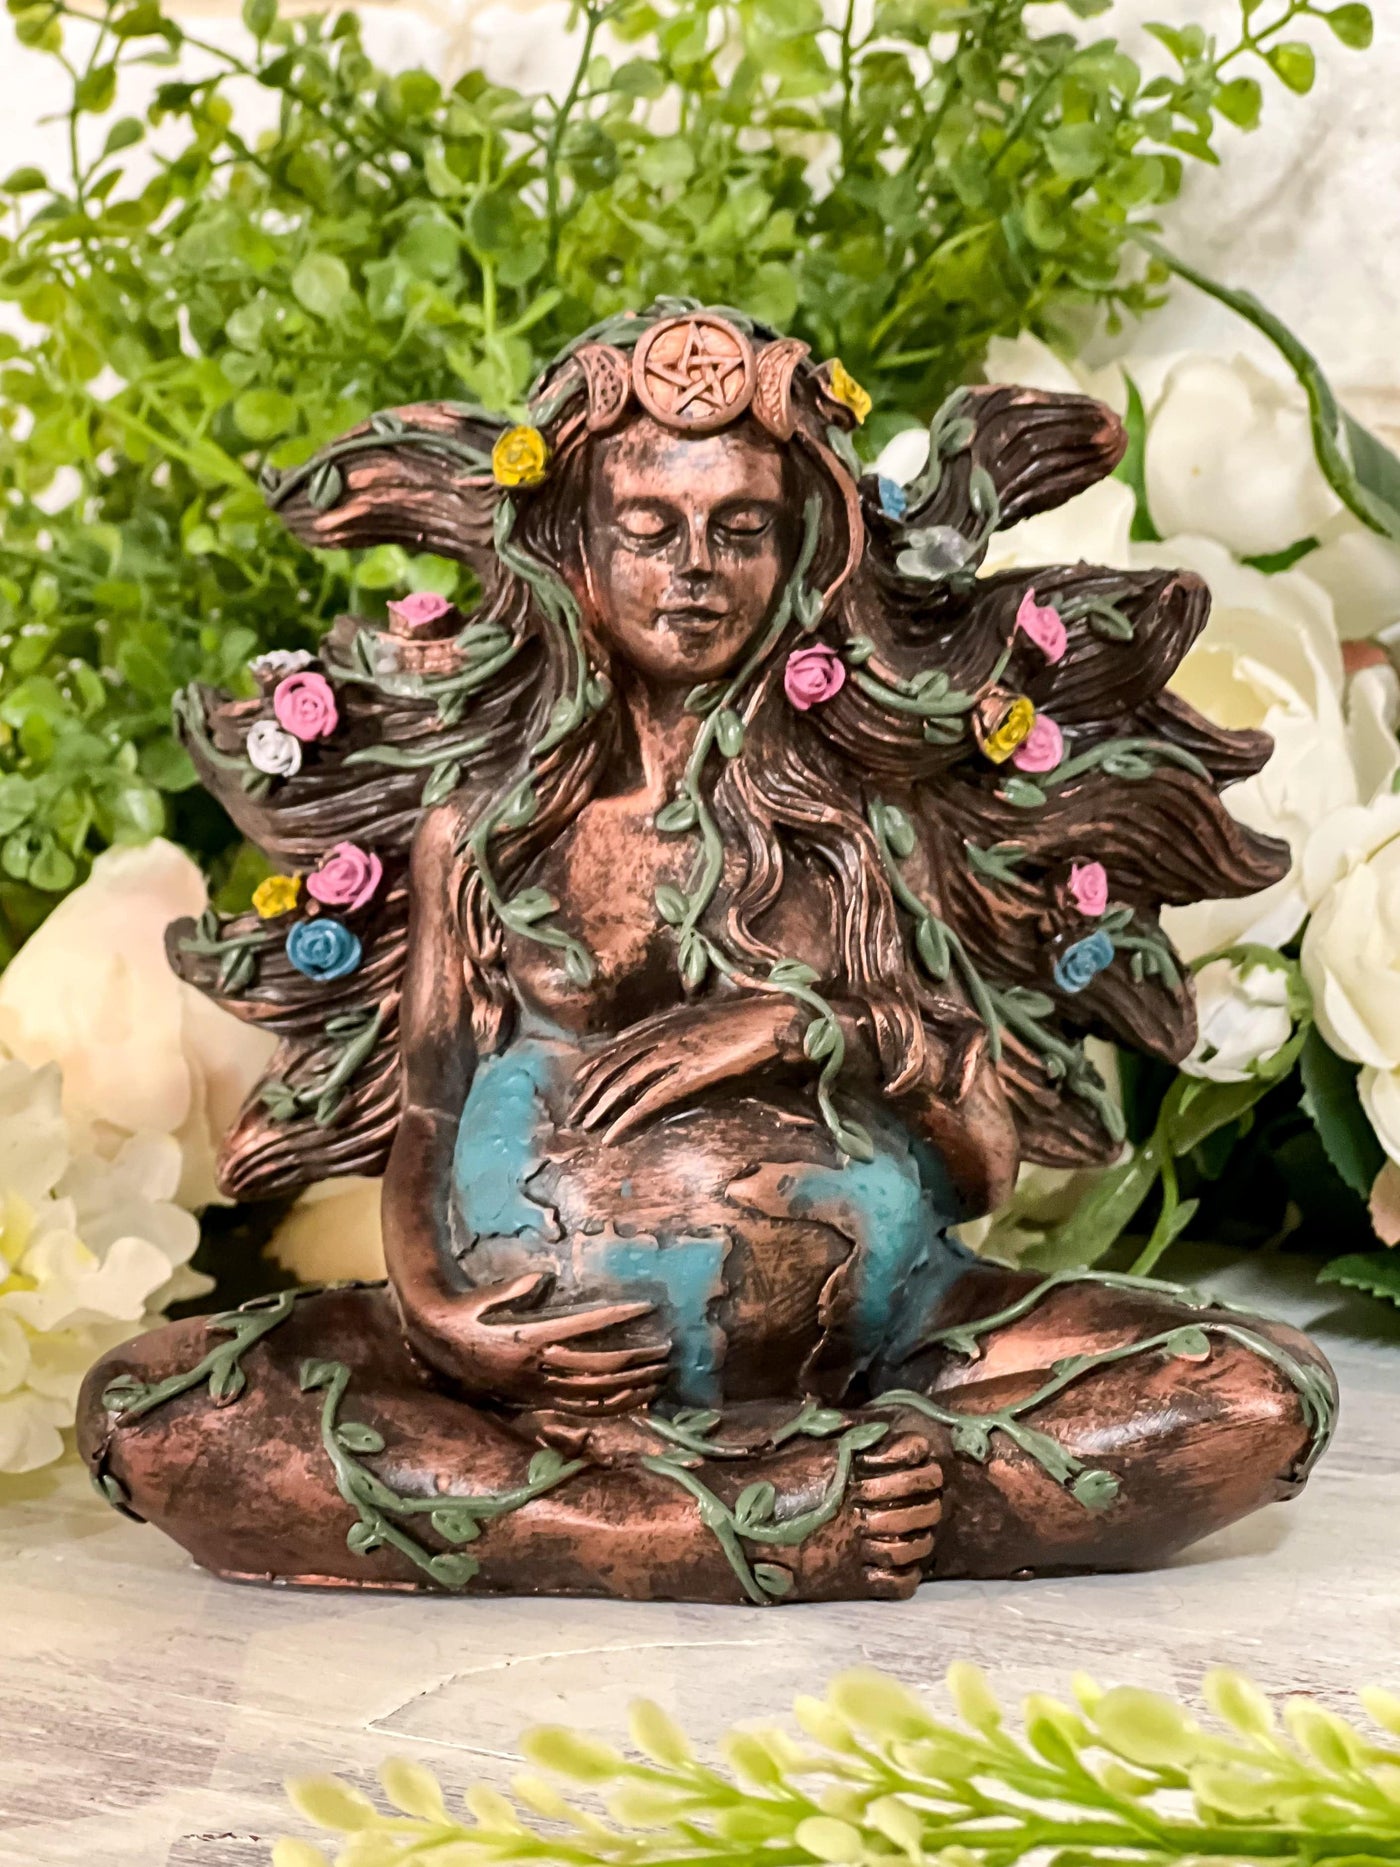 GAIA STATUE Revive In Style Vintage Furniture Painted Refinished Redesign Beautiful One of a Kind Artistic Antique Unique Home Decor Interior Design French Country Shabby Chic Cottage Farmhouse Grandmillenial Coastal Chalk Paint Metallic Glam Eclectic Quality Dovetailed Rustic Furniture Painter Pinterest Bedroom Living Room Entryway Kitchen Home Trends House Styles Decorating ideas